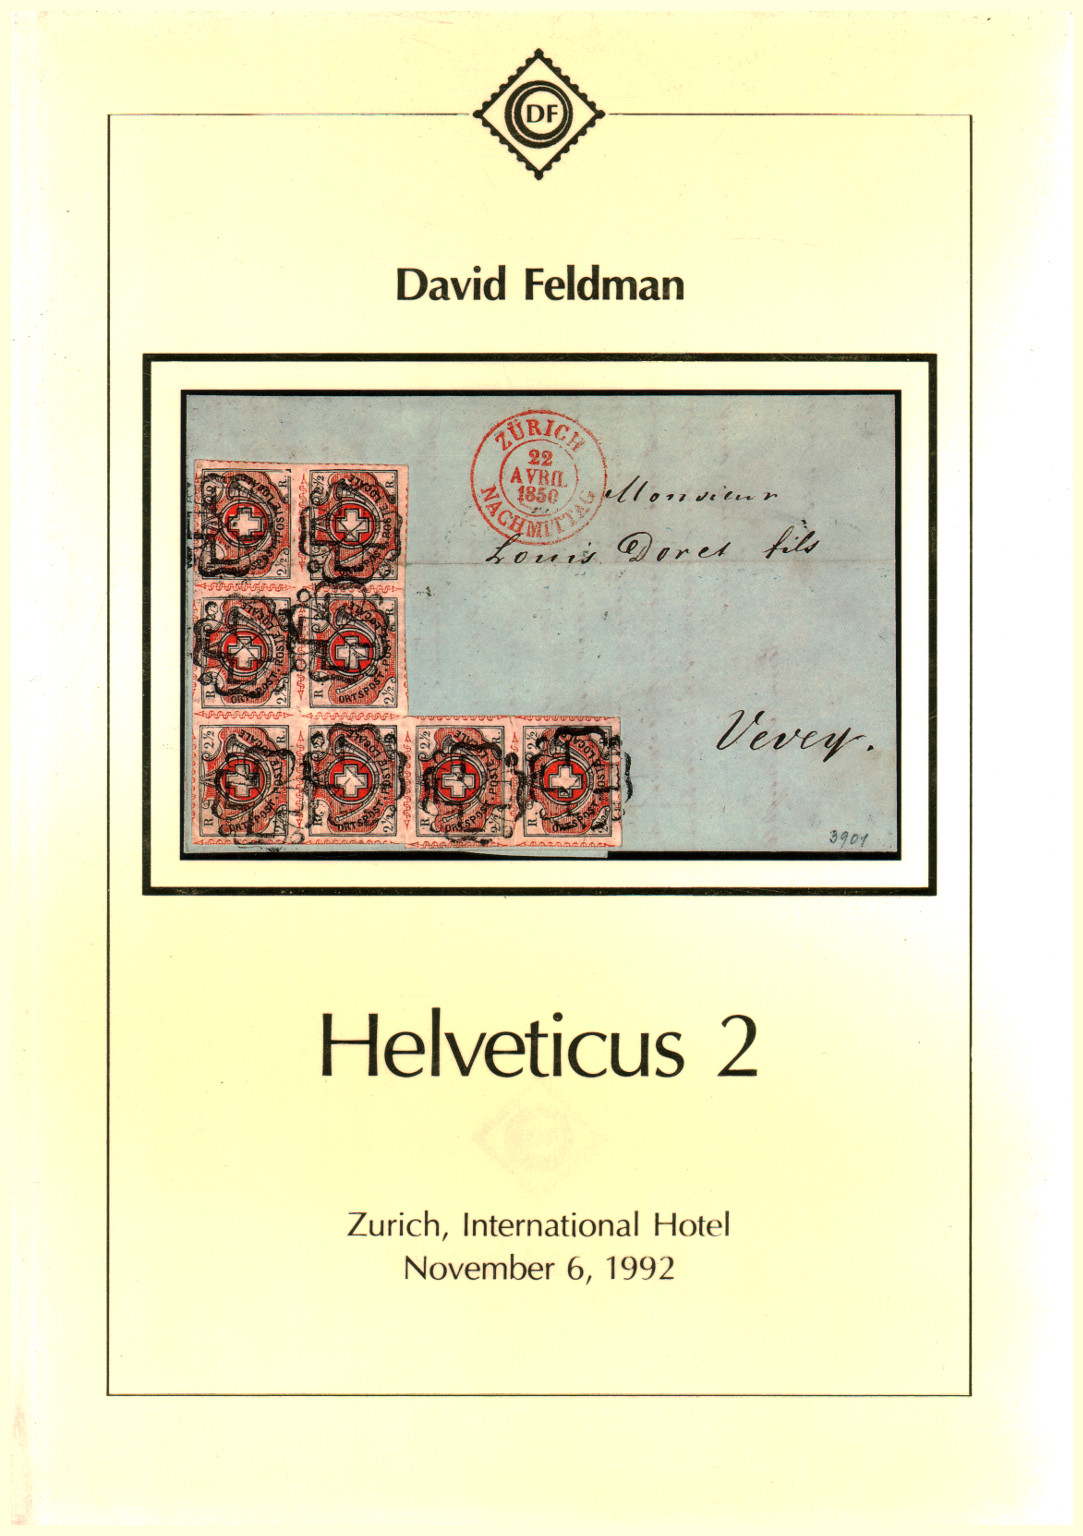 Helveticus 2, s.a.